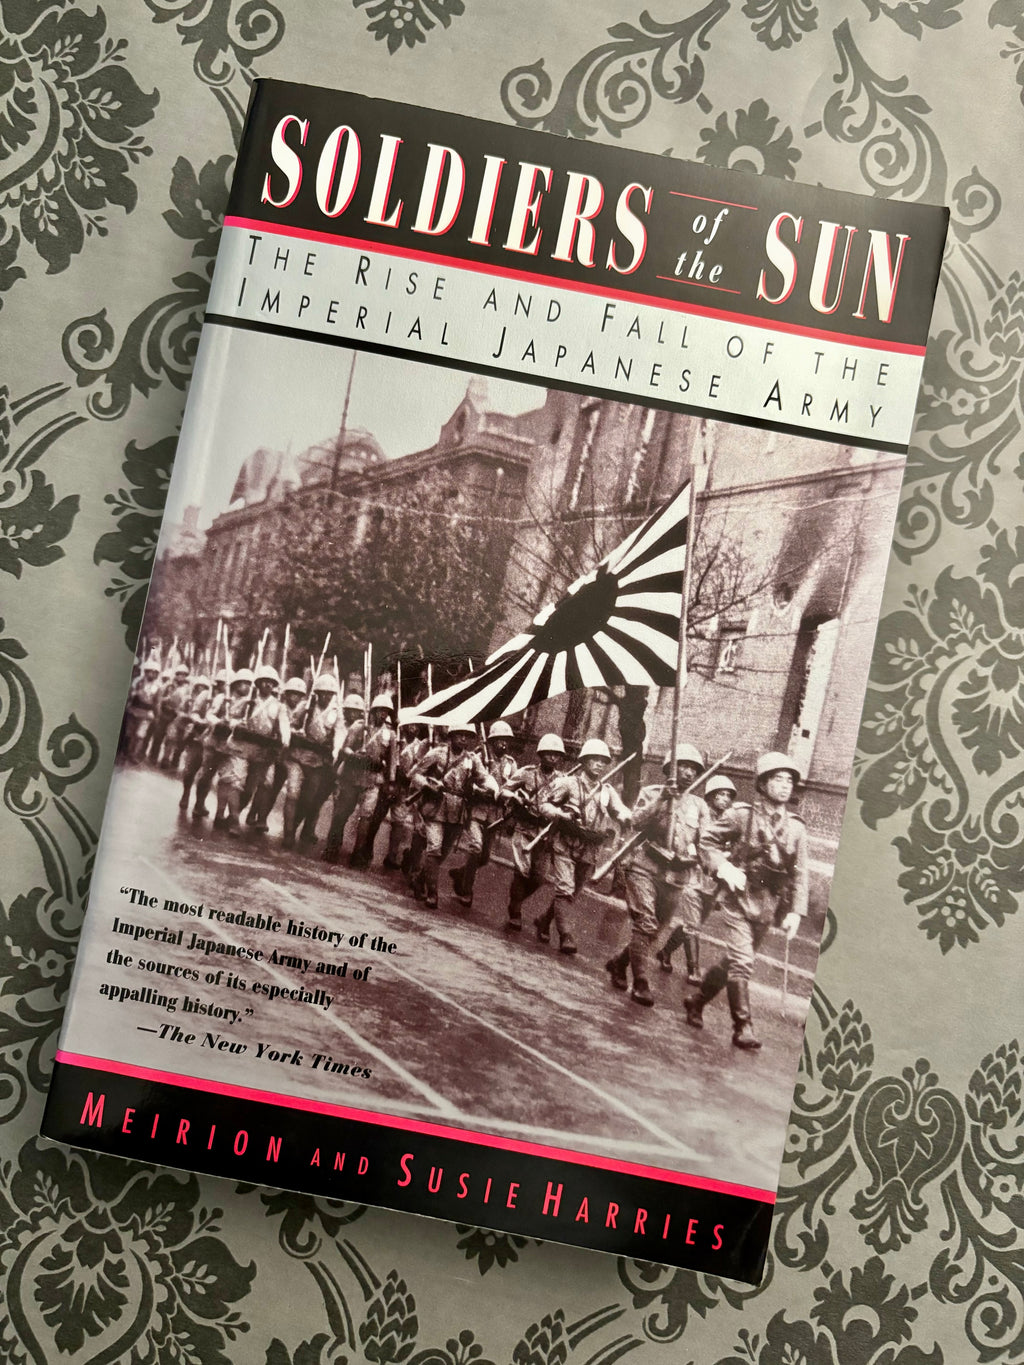 Soldiers of the Sun: The Rise and Fall of the Imperial Japanese Army- By Meirion and Susie Harries